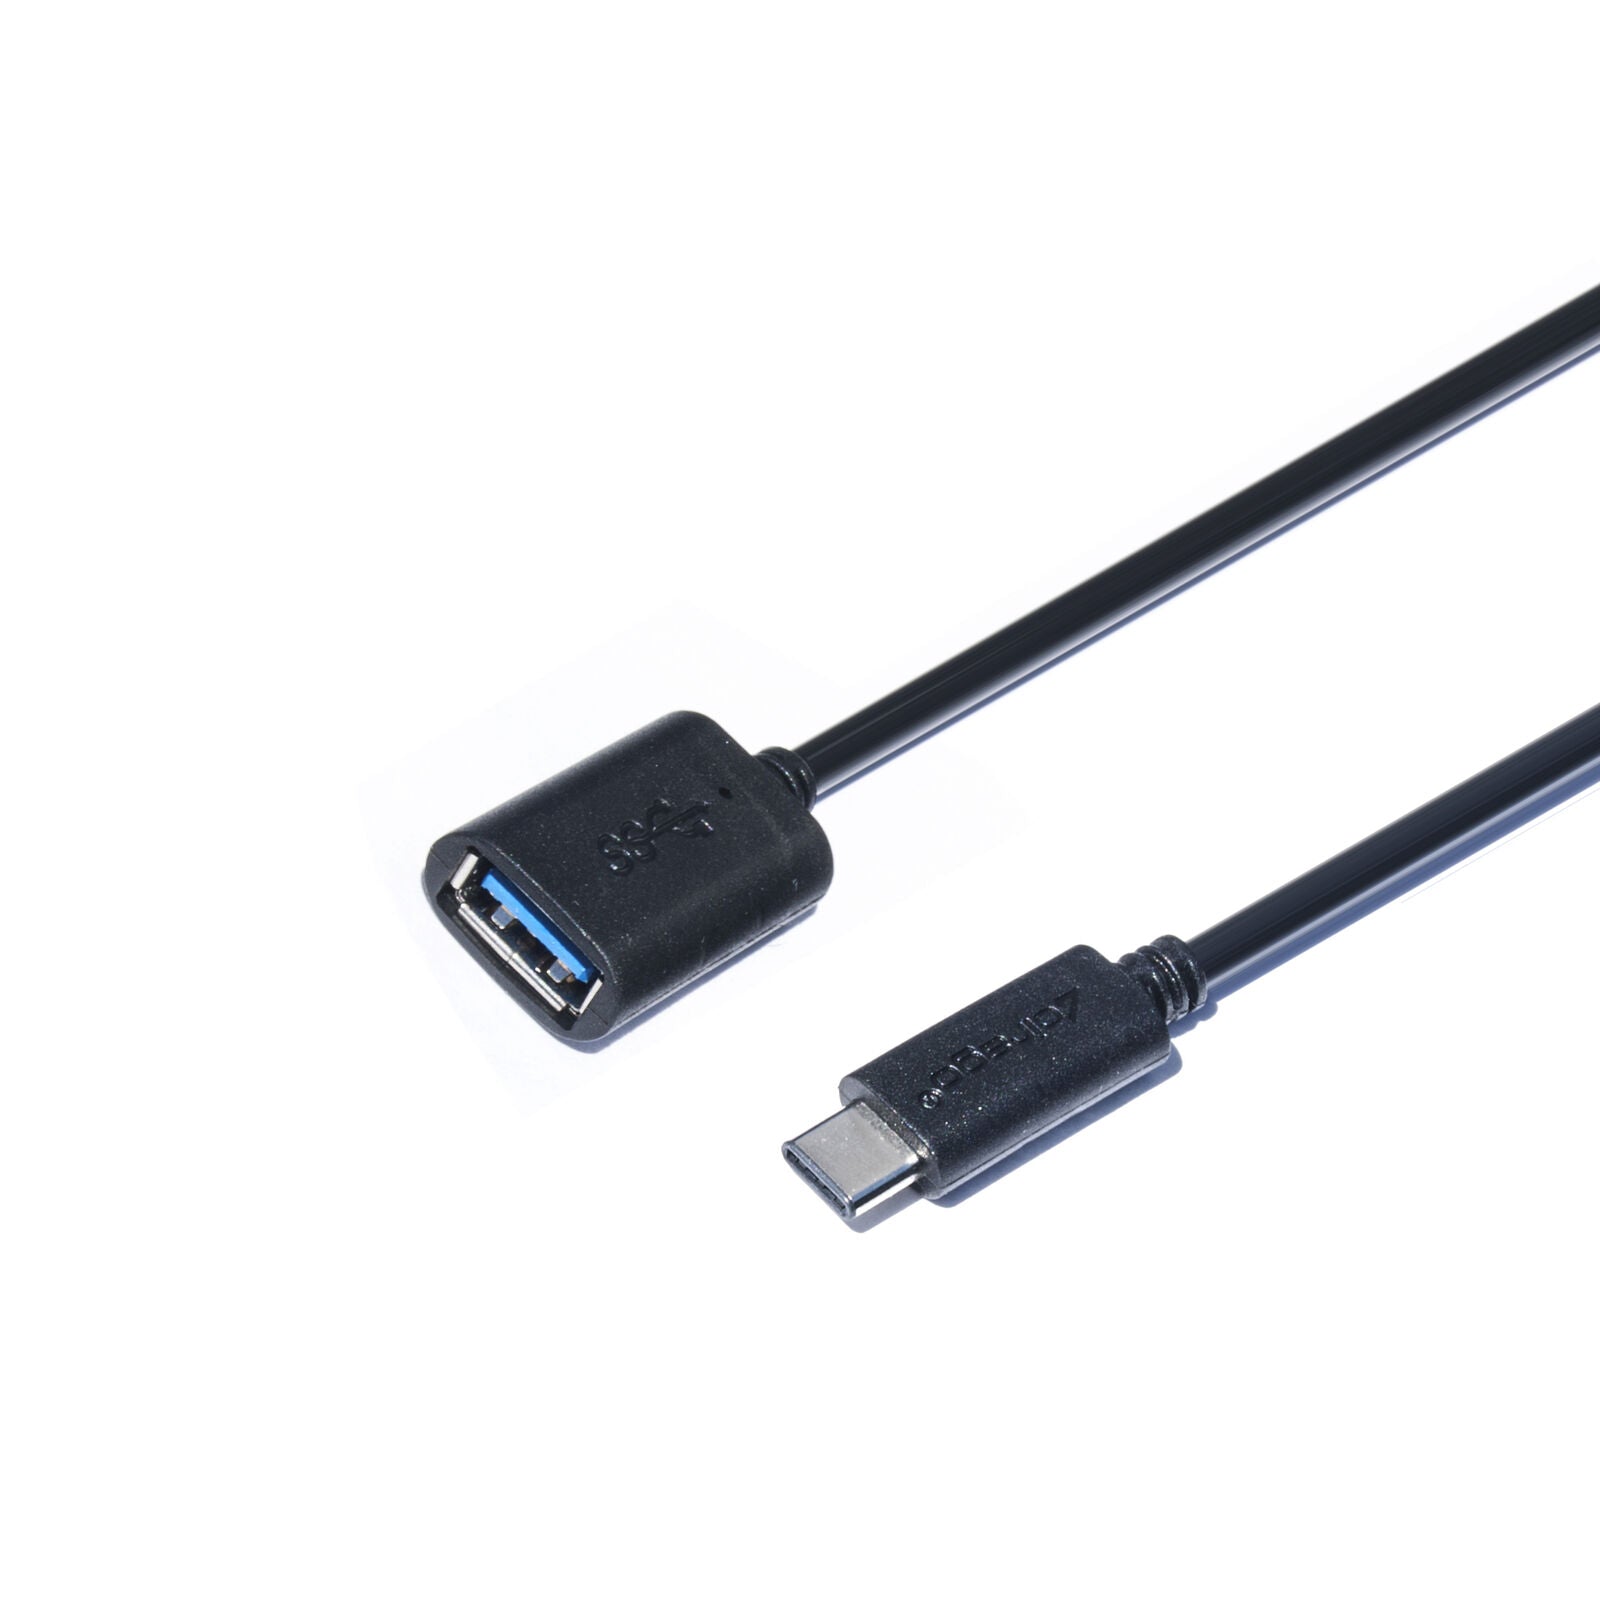 Cirago USB-C to USB Female 3 Feet 5 Gbps for Connect USB Accessories and Devices